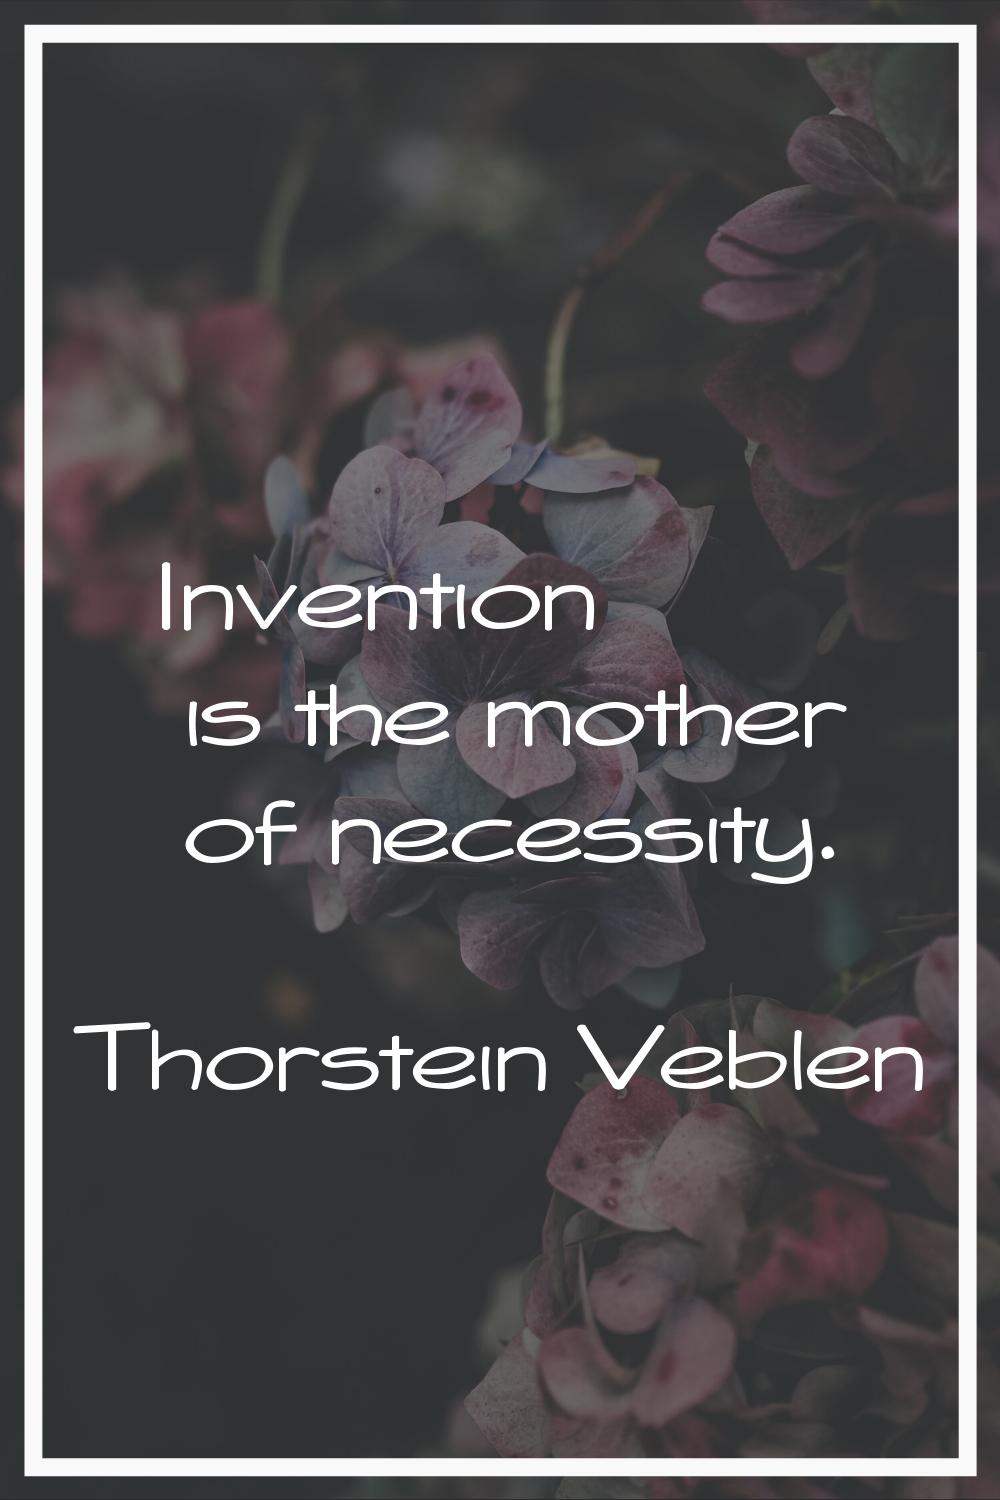 Invention is the mother of necessity.